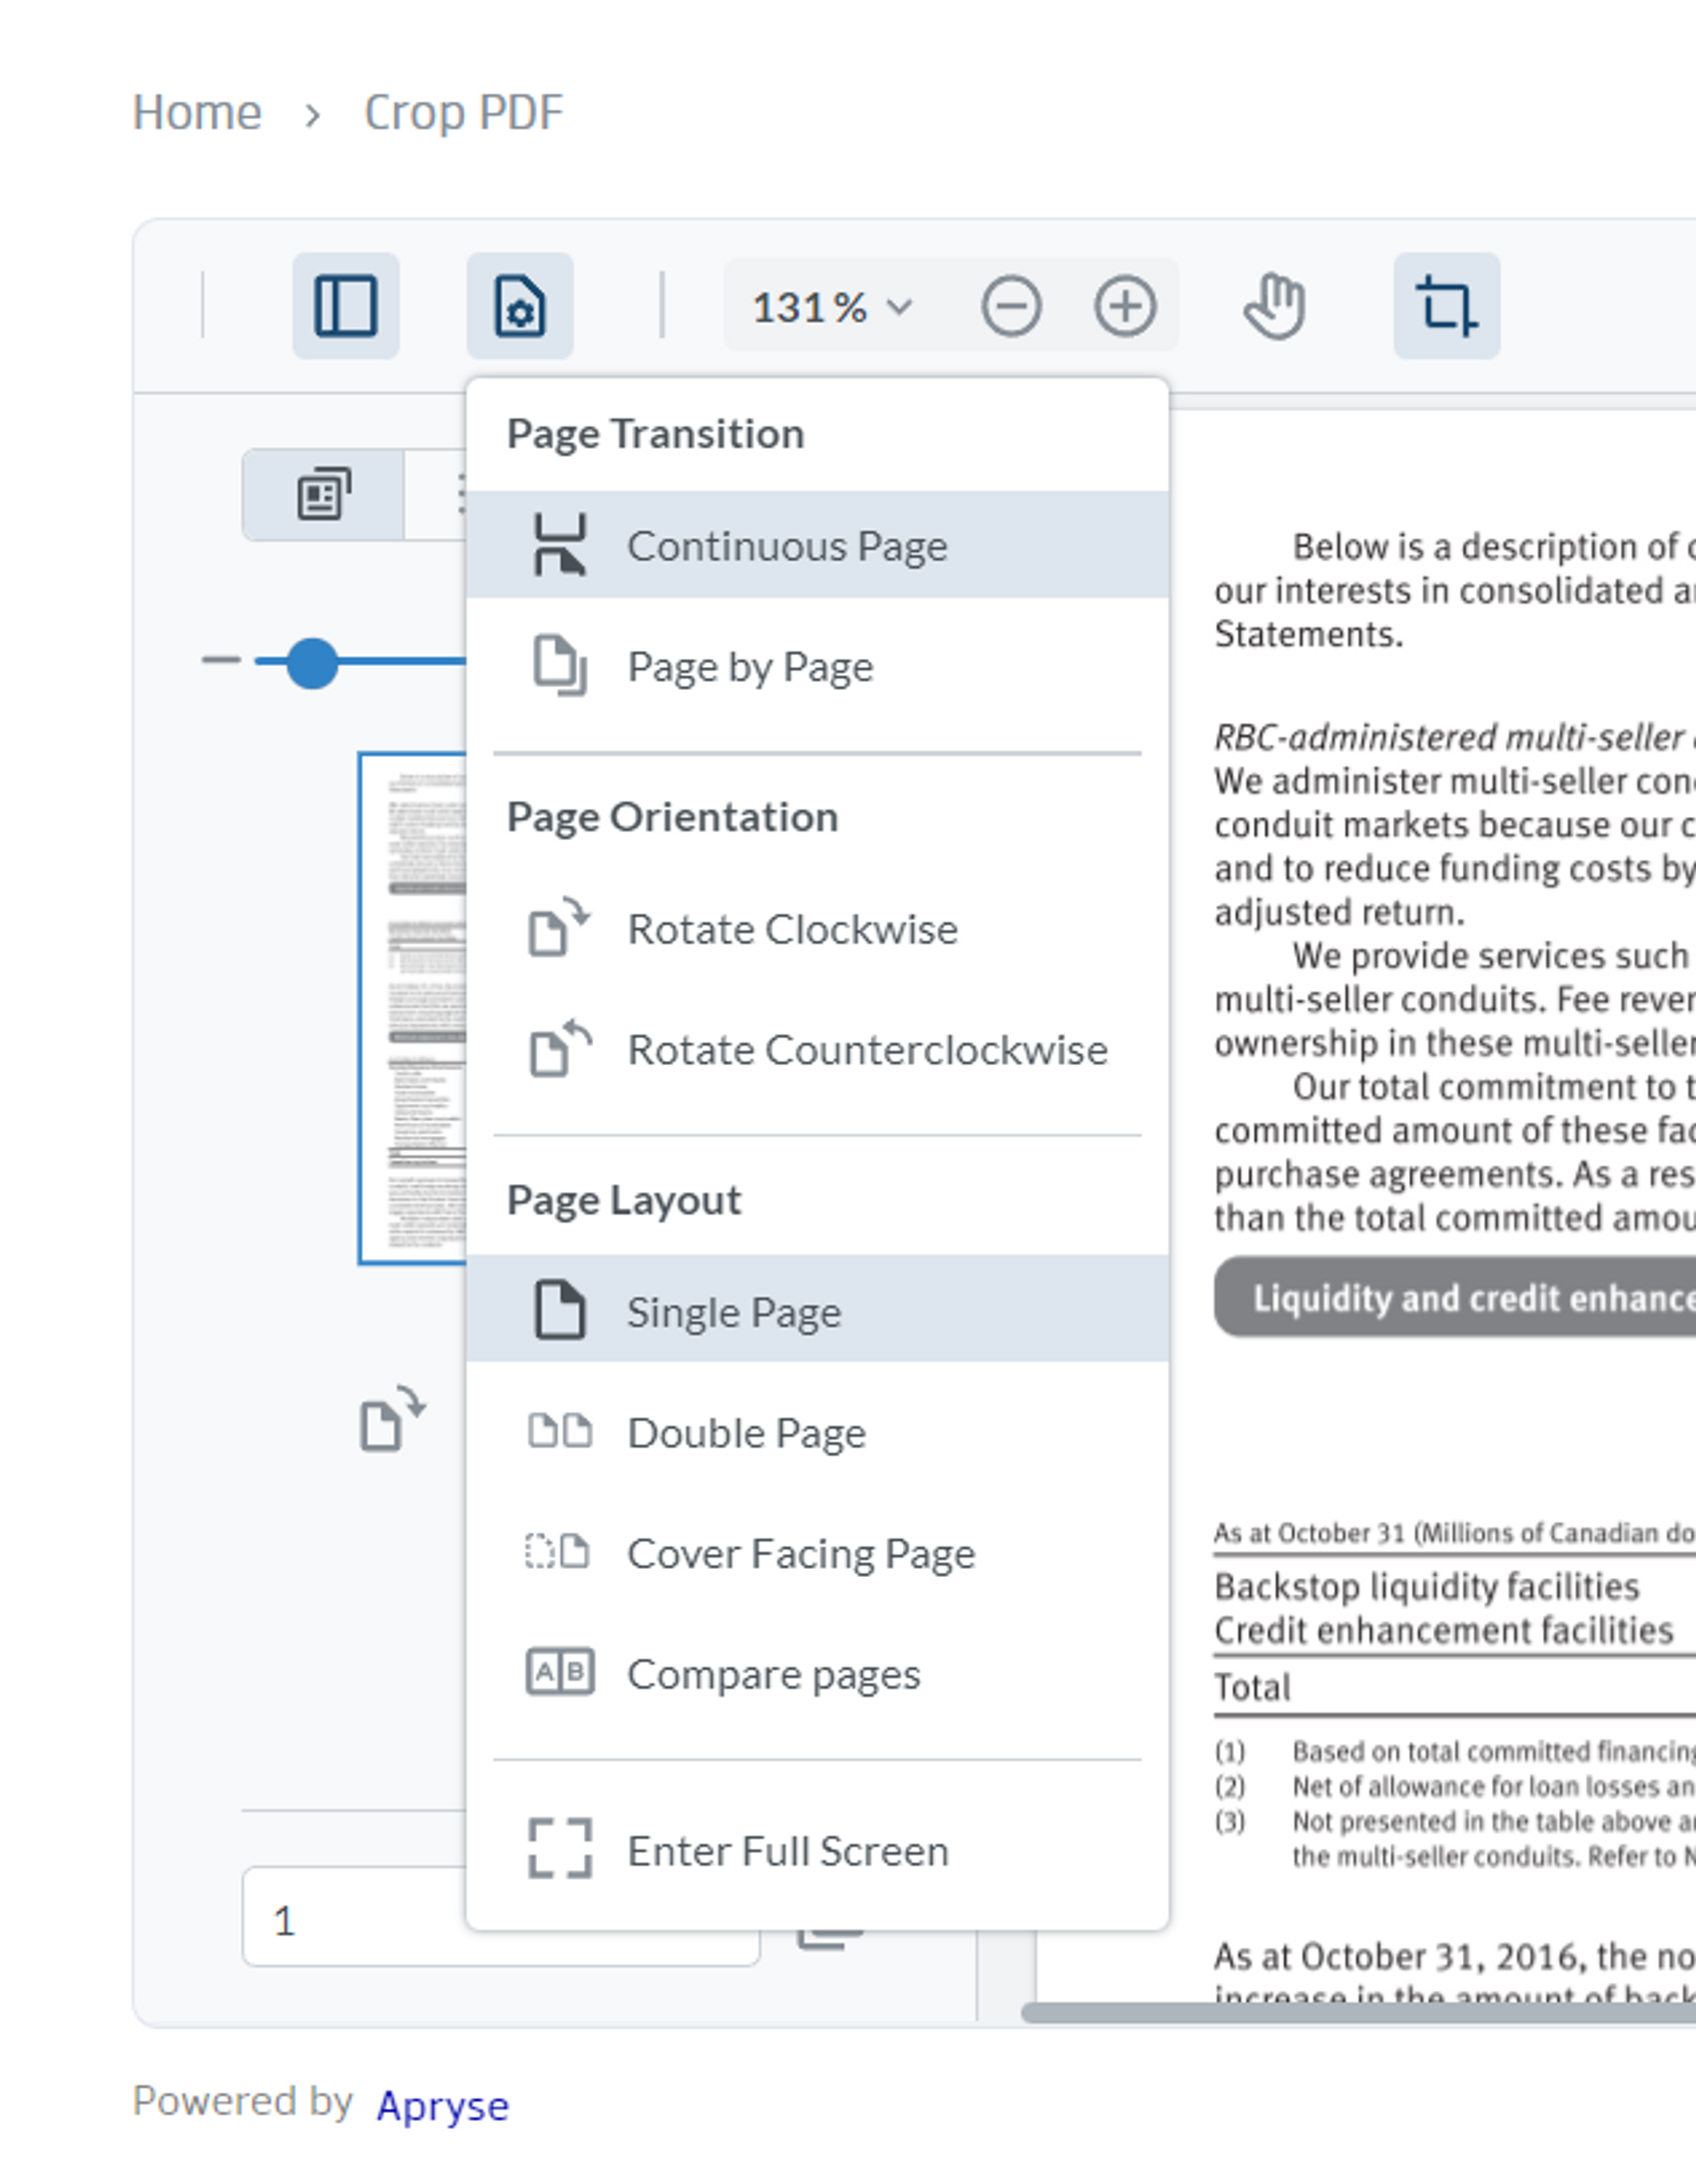 PDF page view customization options in Xodo’s online Crop PDF viewer 